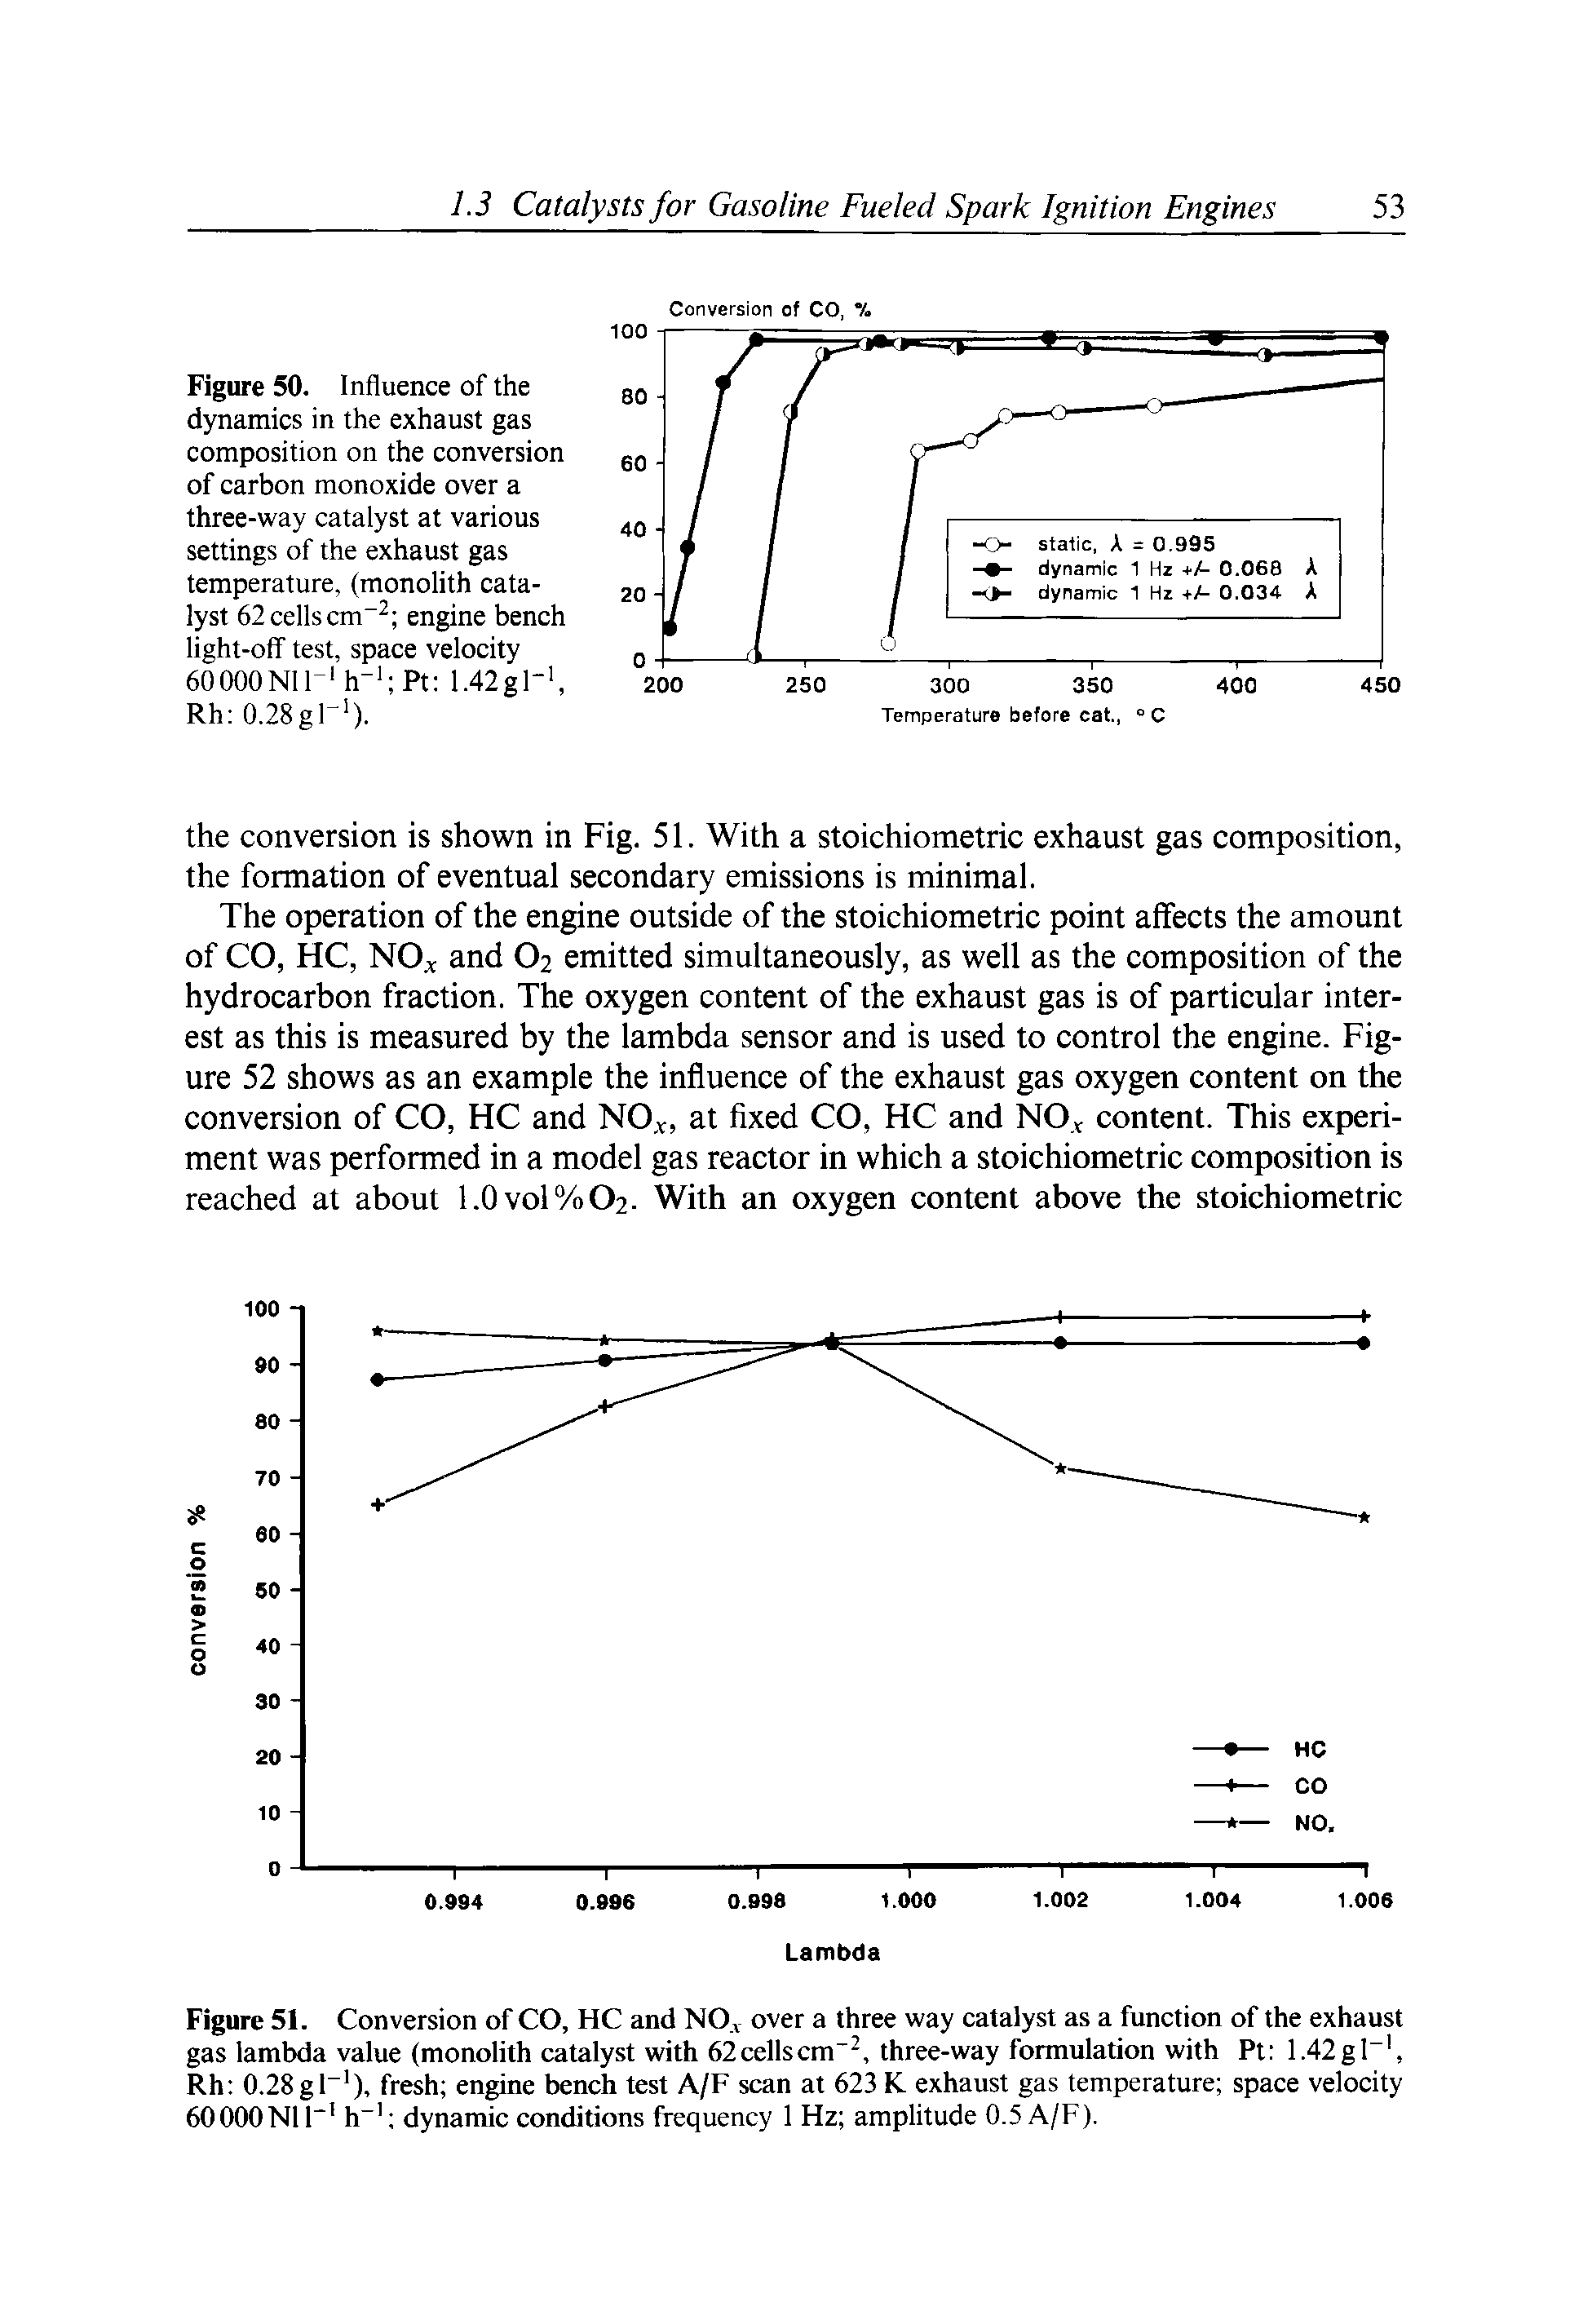 Figure 51. Conversion of CO, HC and NO., over a three way catalyst as a function of the exhaust gas lambda value (monolith catalyst with 62cellscm", three-way formulation with Pt 1.42gl , Rh 0.28gl ), fresh engine bench test A/F scan at 623 K exhaust gas temperature space velocity 60000NIC h dynamic conditions frequency 1 Hz amplitude 0.5 A/F).